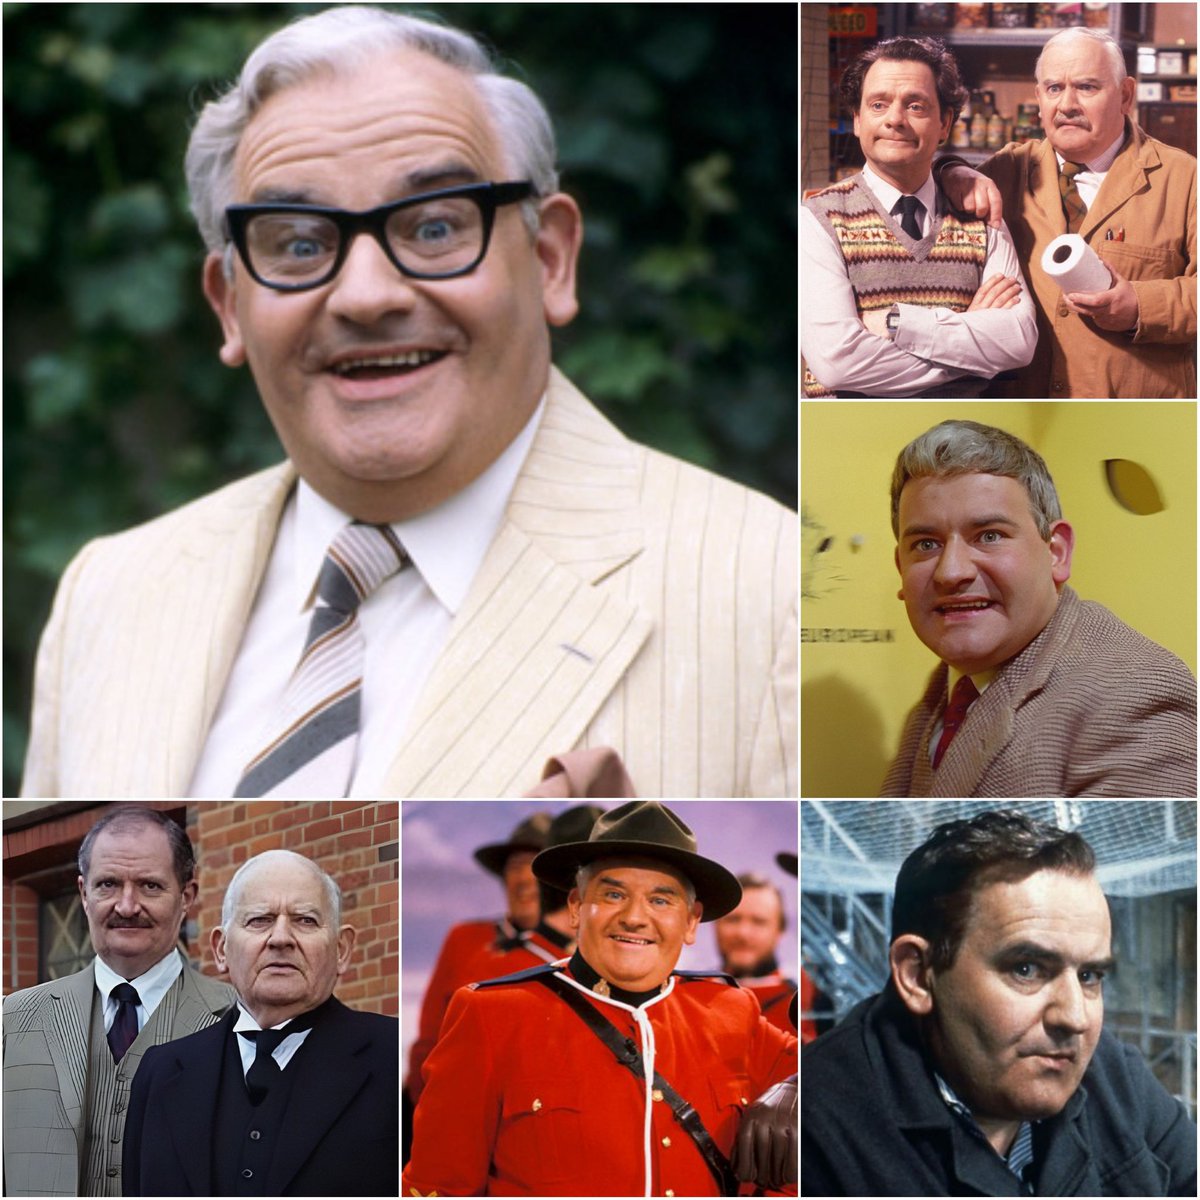 #BOTD #RonnieBarker #television #comedy #actor